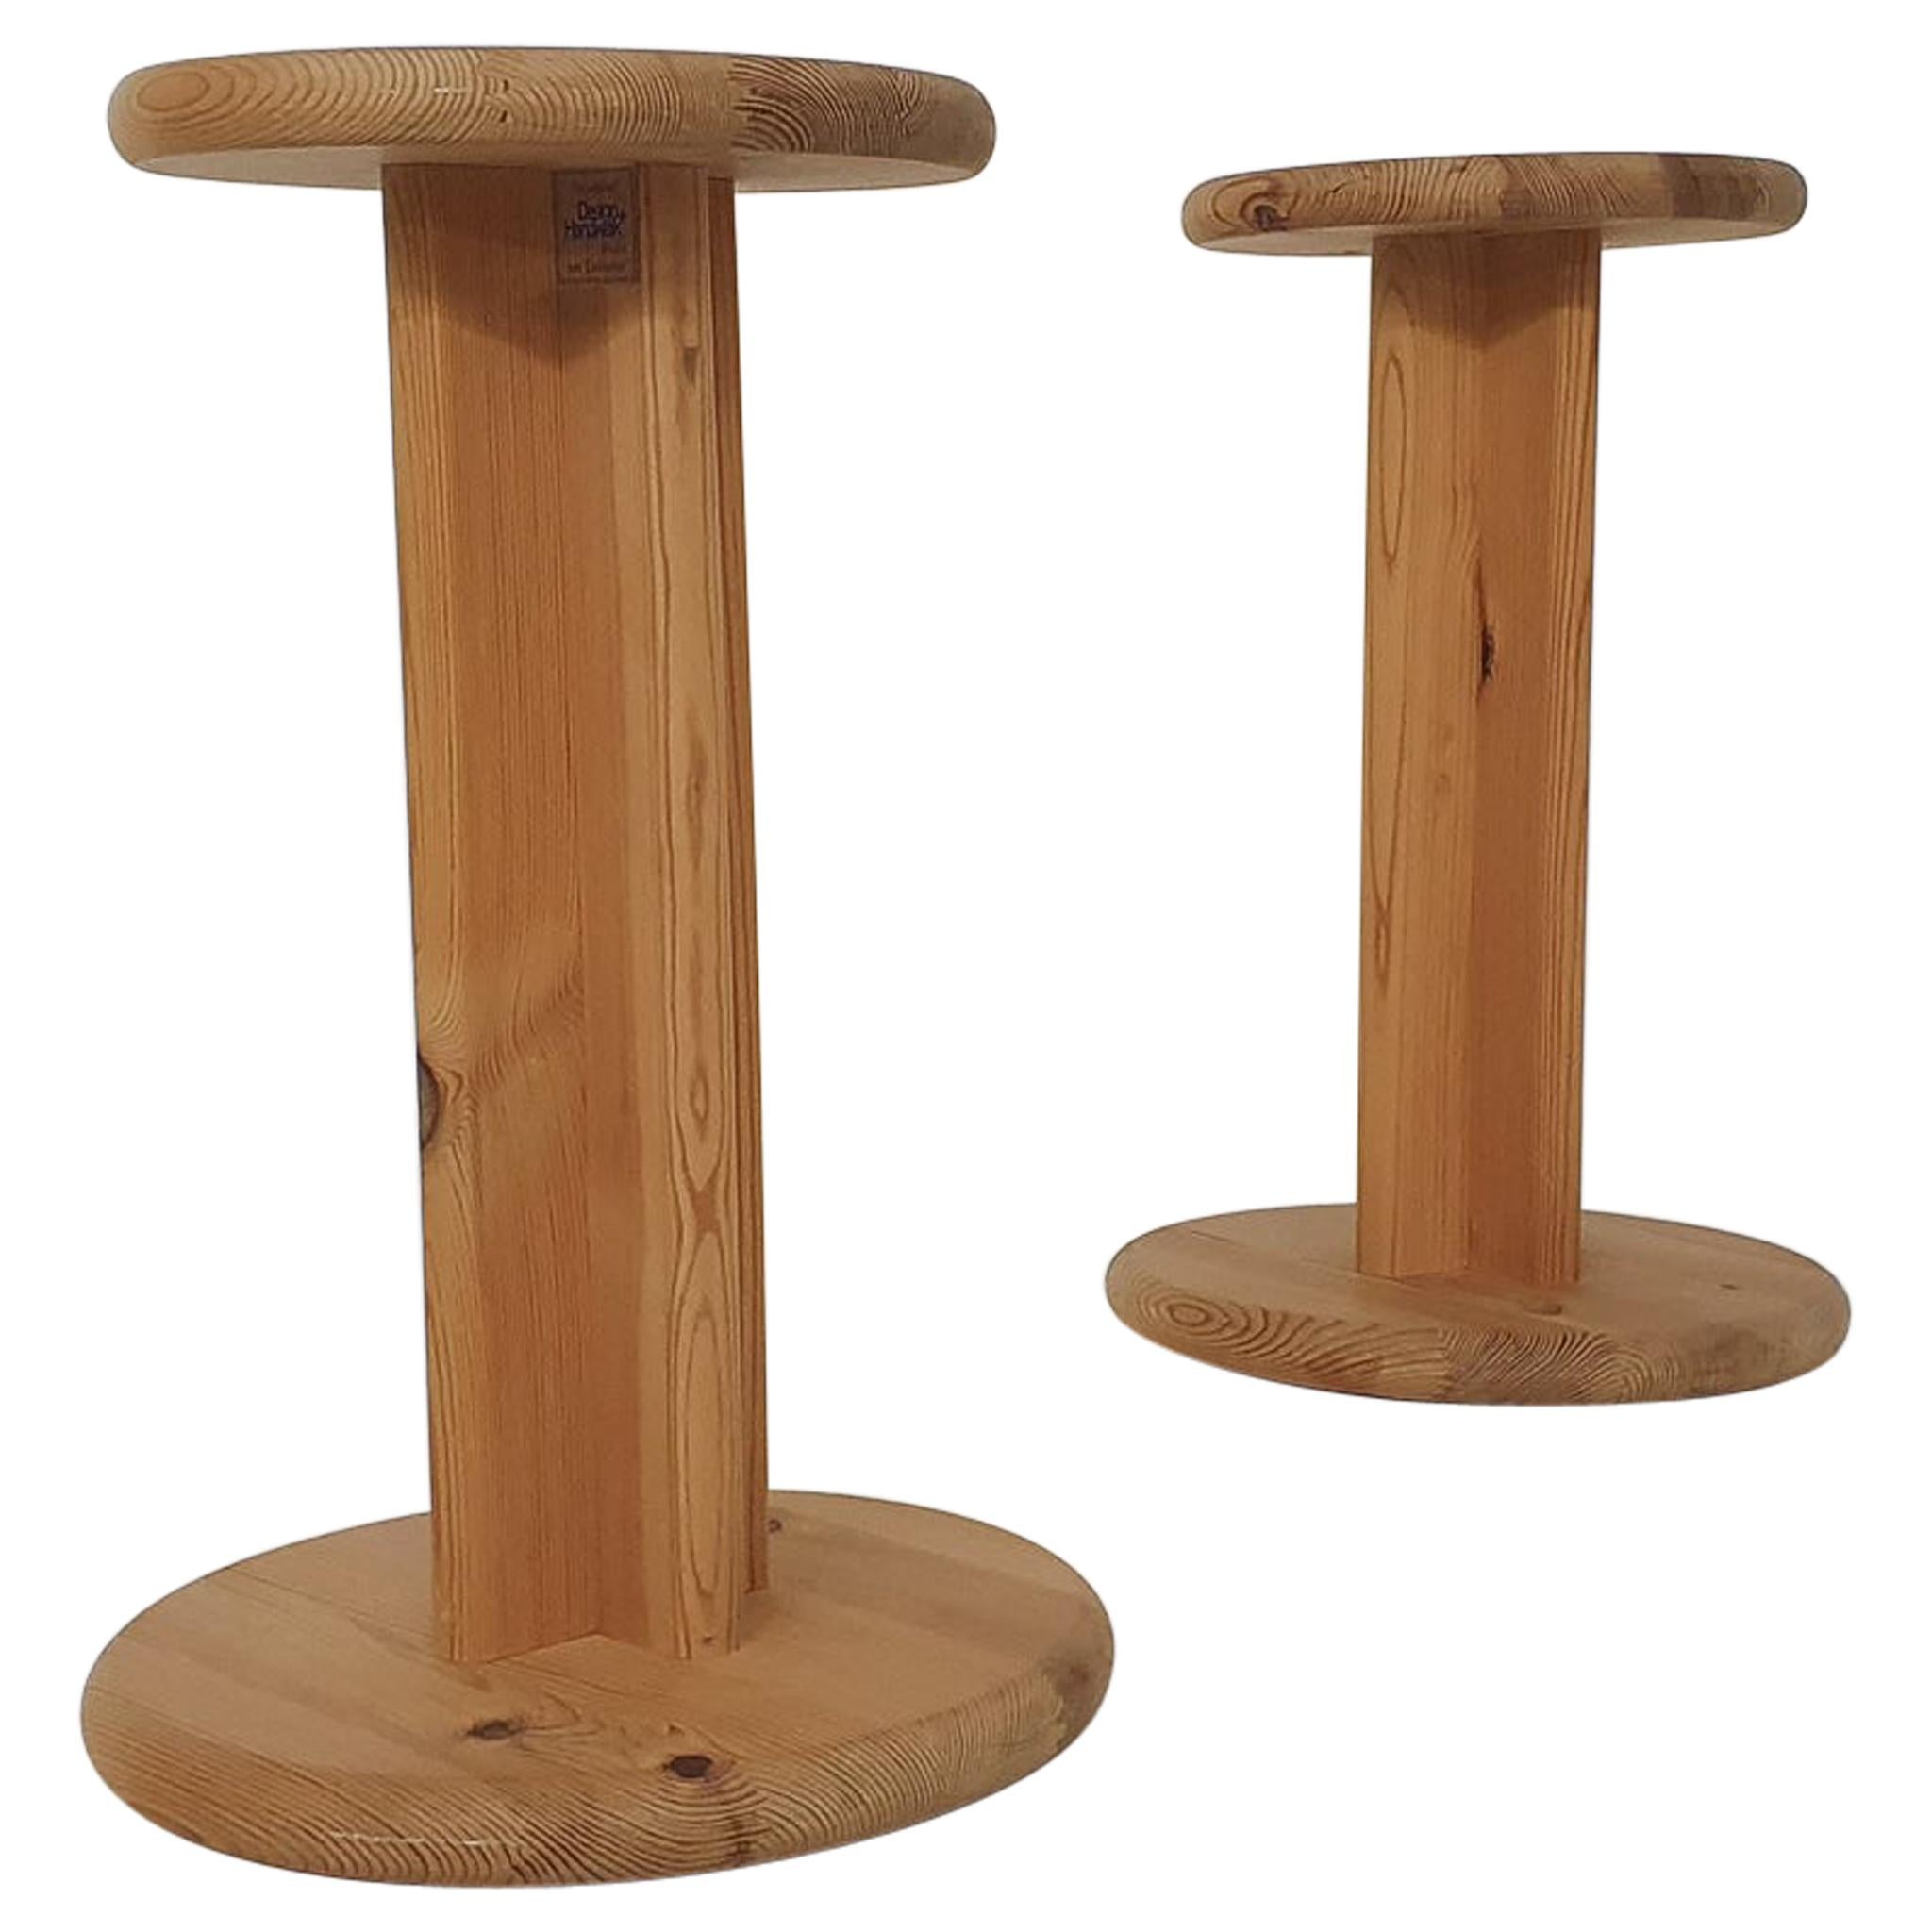 Set of Two Aksel Kjersgaard Pinewood Stools or Plant Stands, Denmark, 1970's